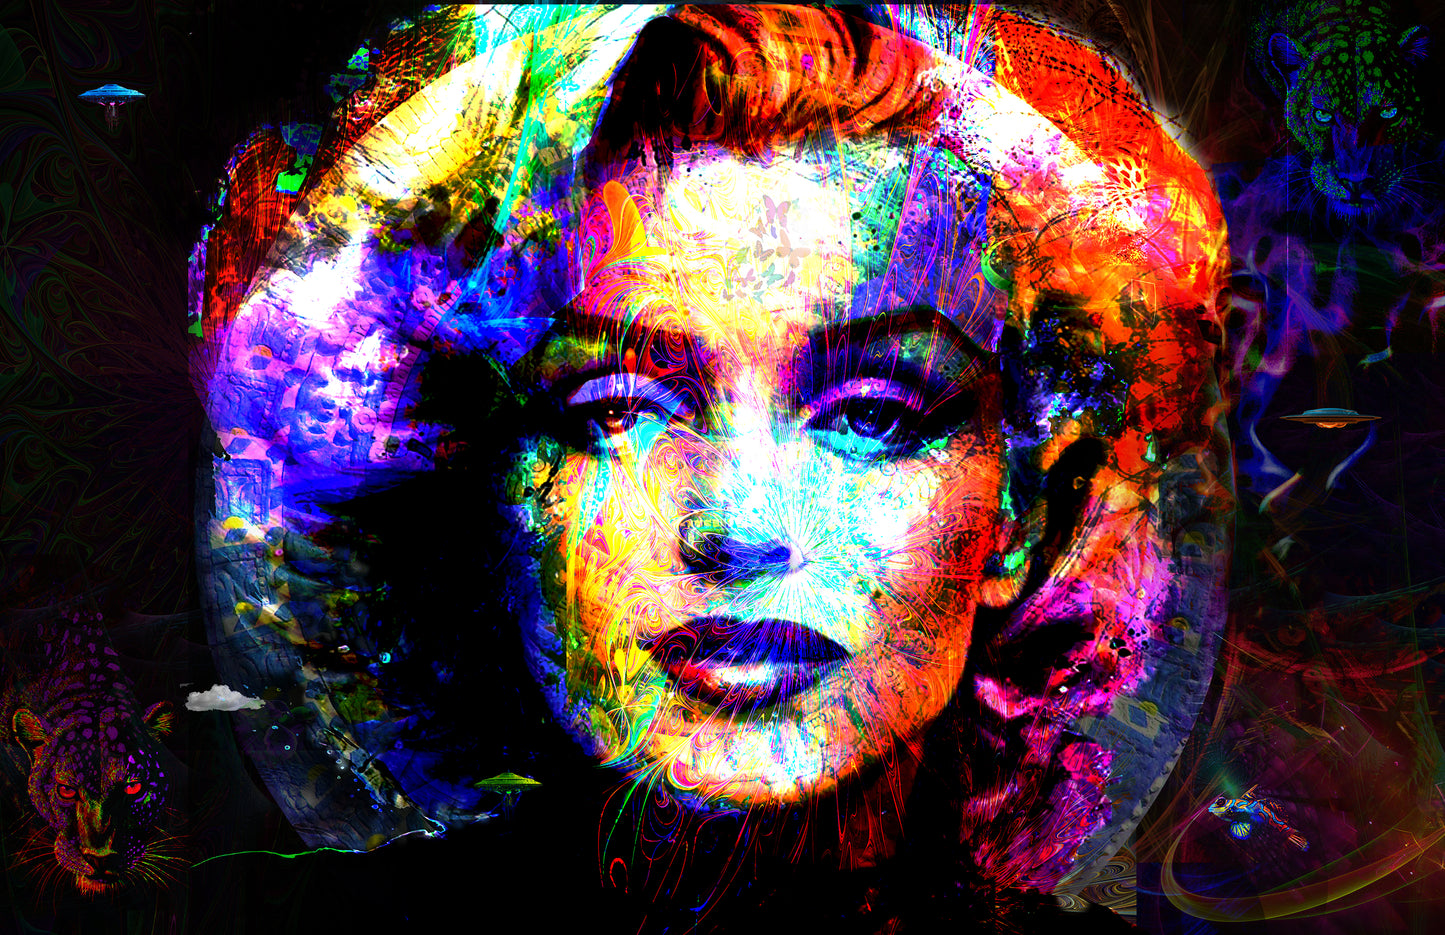 "MARILYN FOR EVER" - LIMITED EDITION PRINT - 12 X 18 Inches